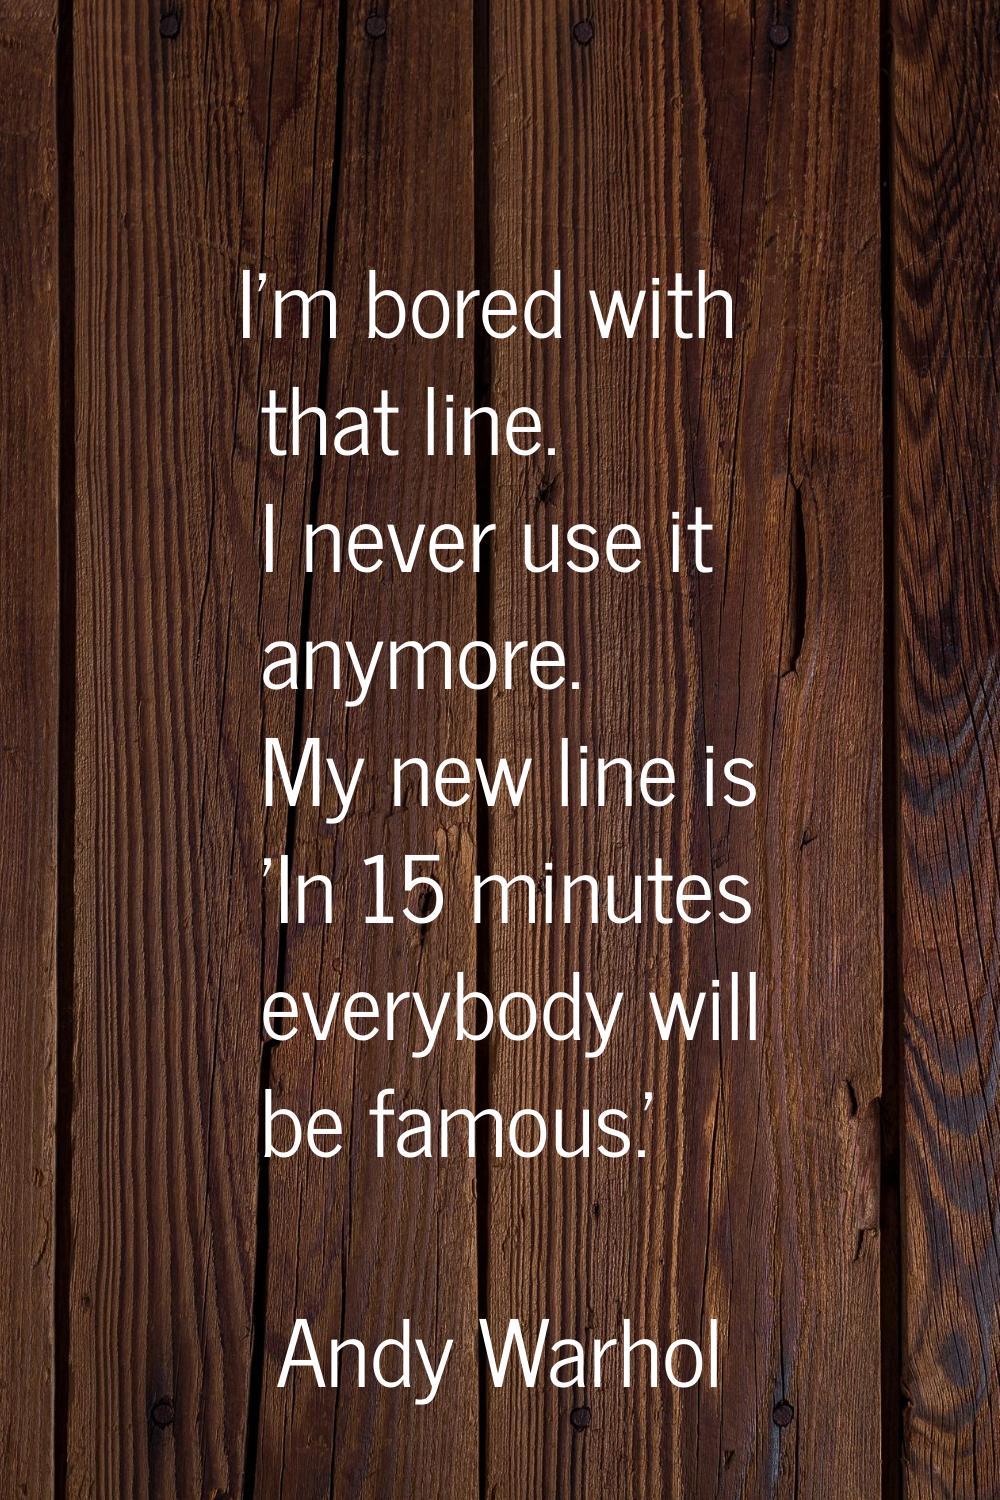 I'm bored with that line. I never use it anymore. My new line is 'In 15 minutes everybody will be f